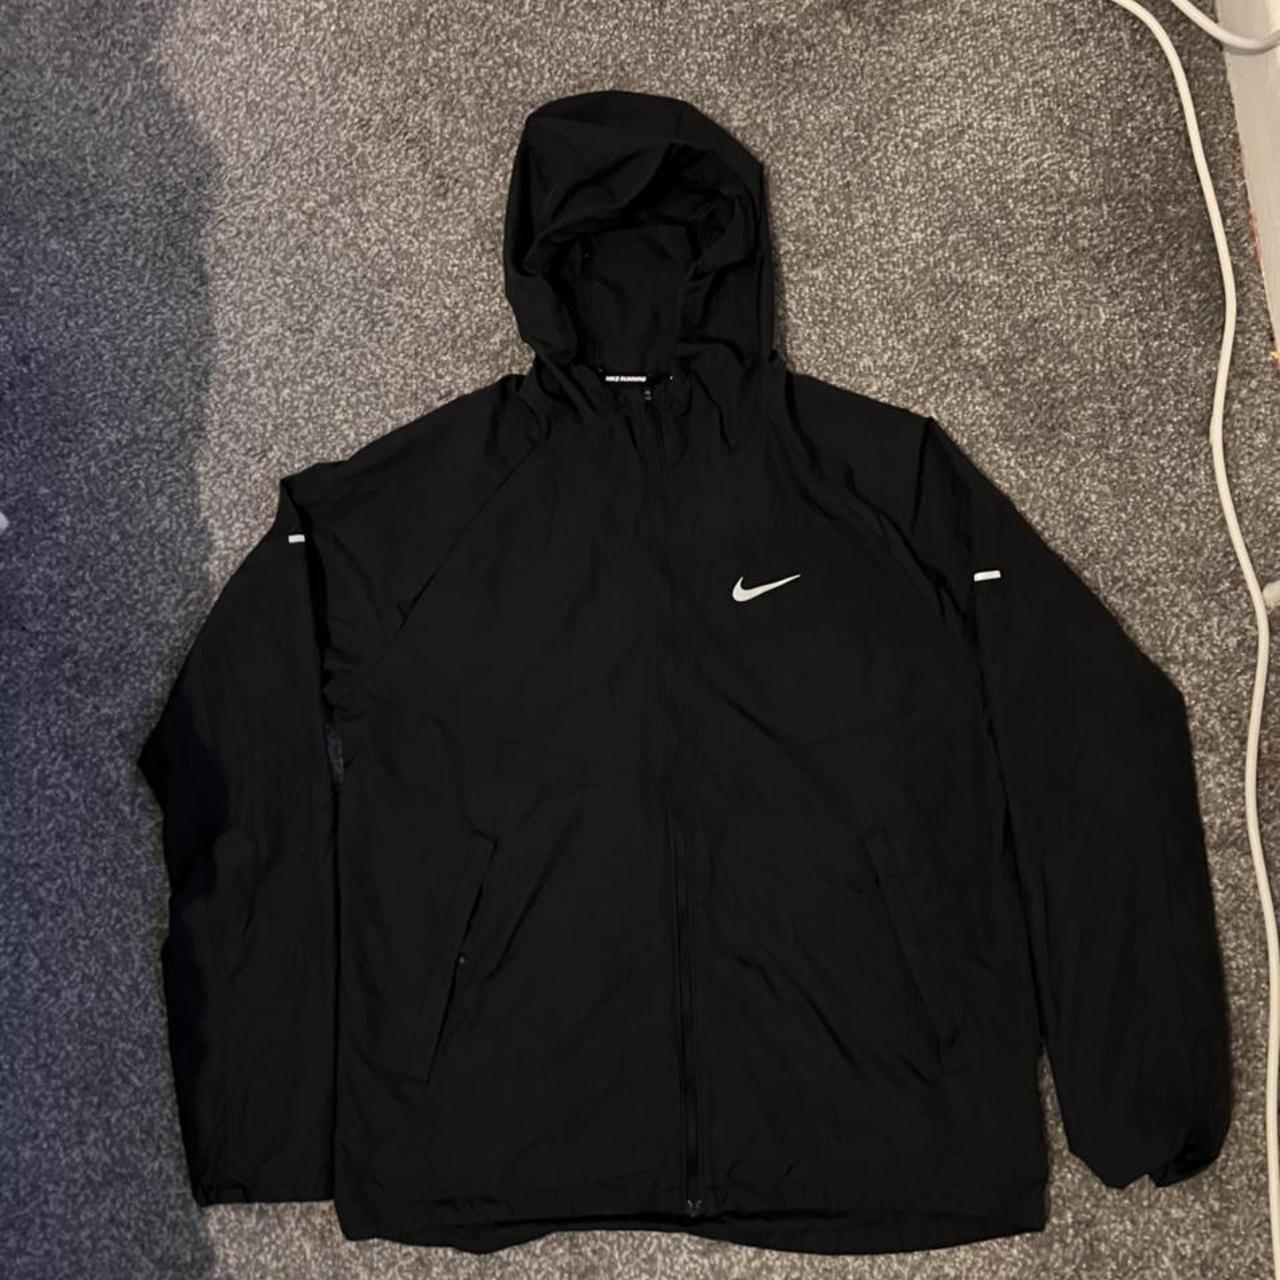 Nike repel jacket Size small the buttons have... - Depop